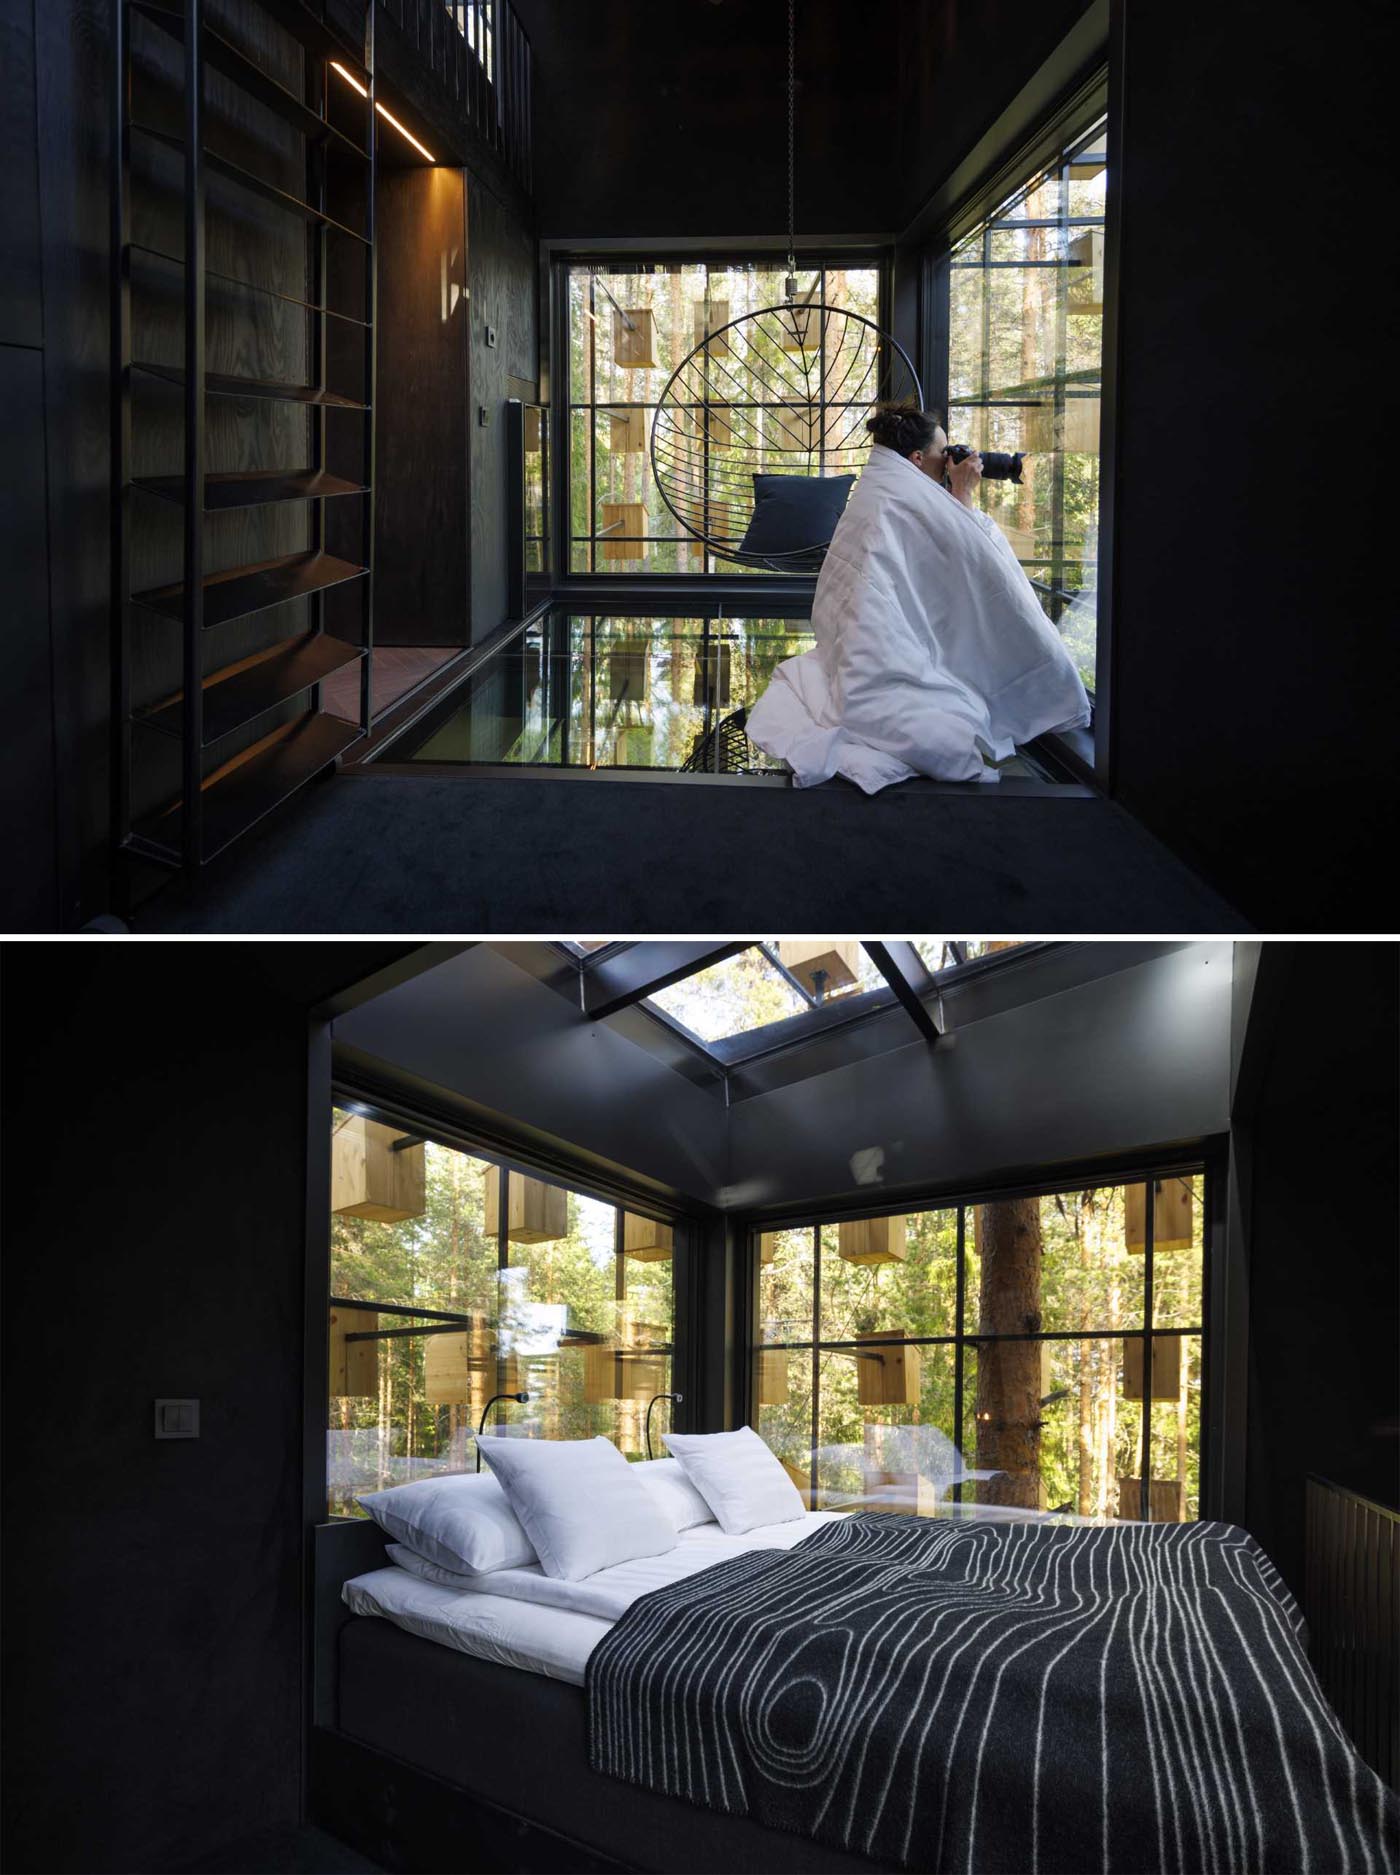 The dark interior of a suspended hotel room.